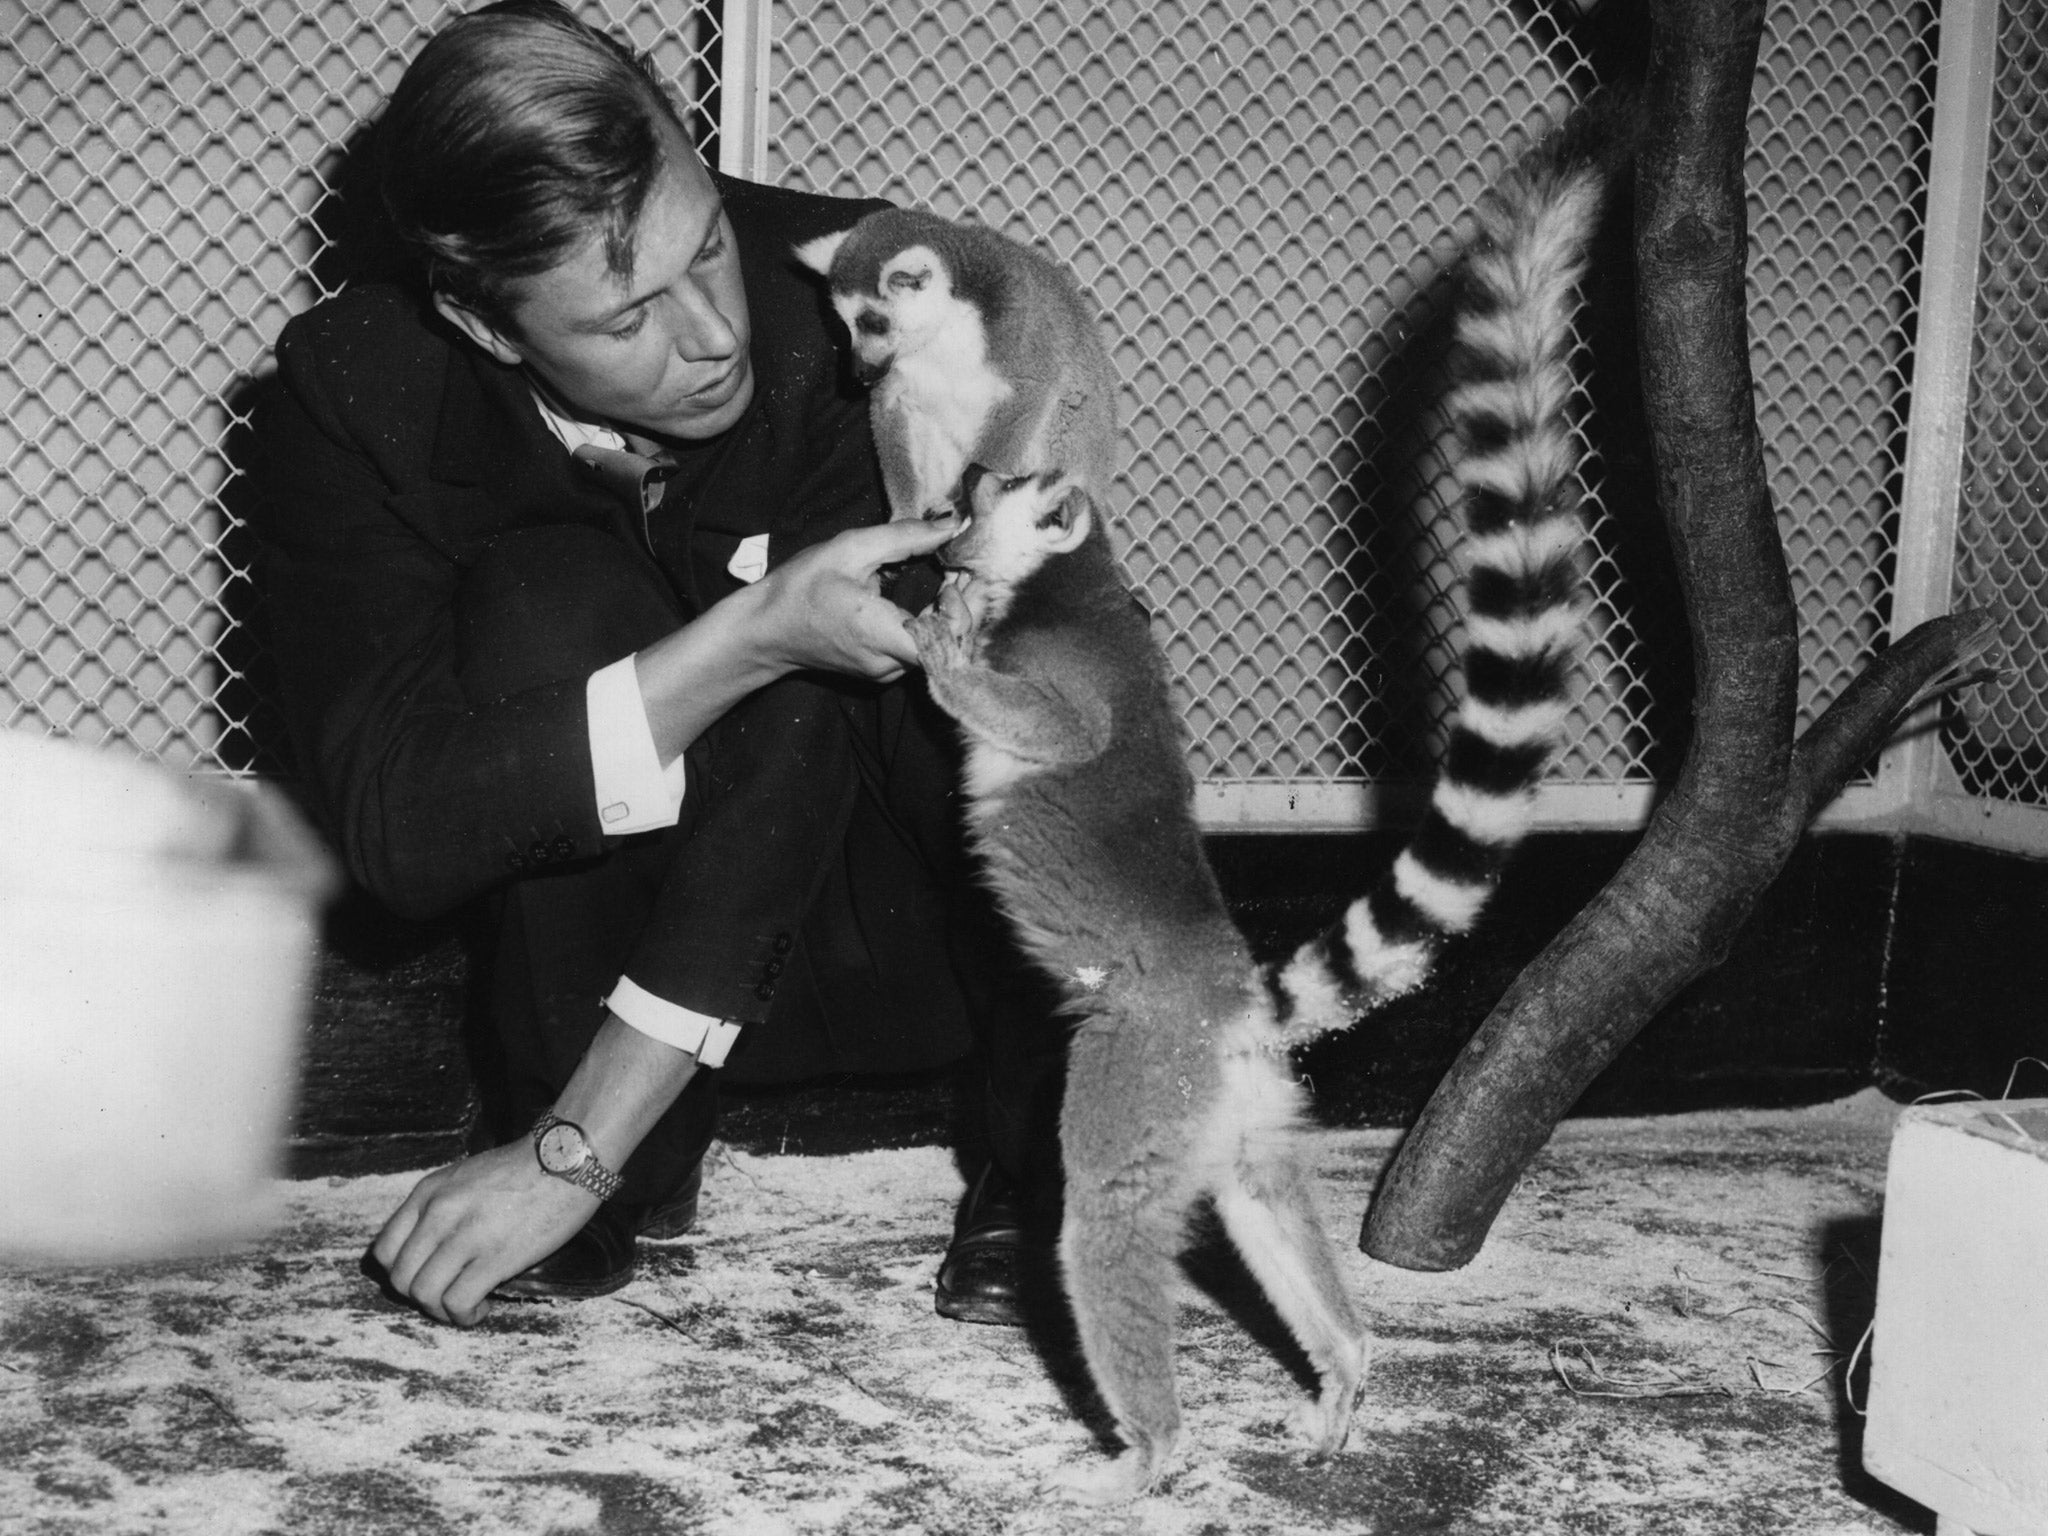 Sir David Attenborough pictured with lemurs during a lecture at London zoo in the 60s (Getty)